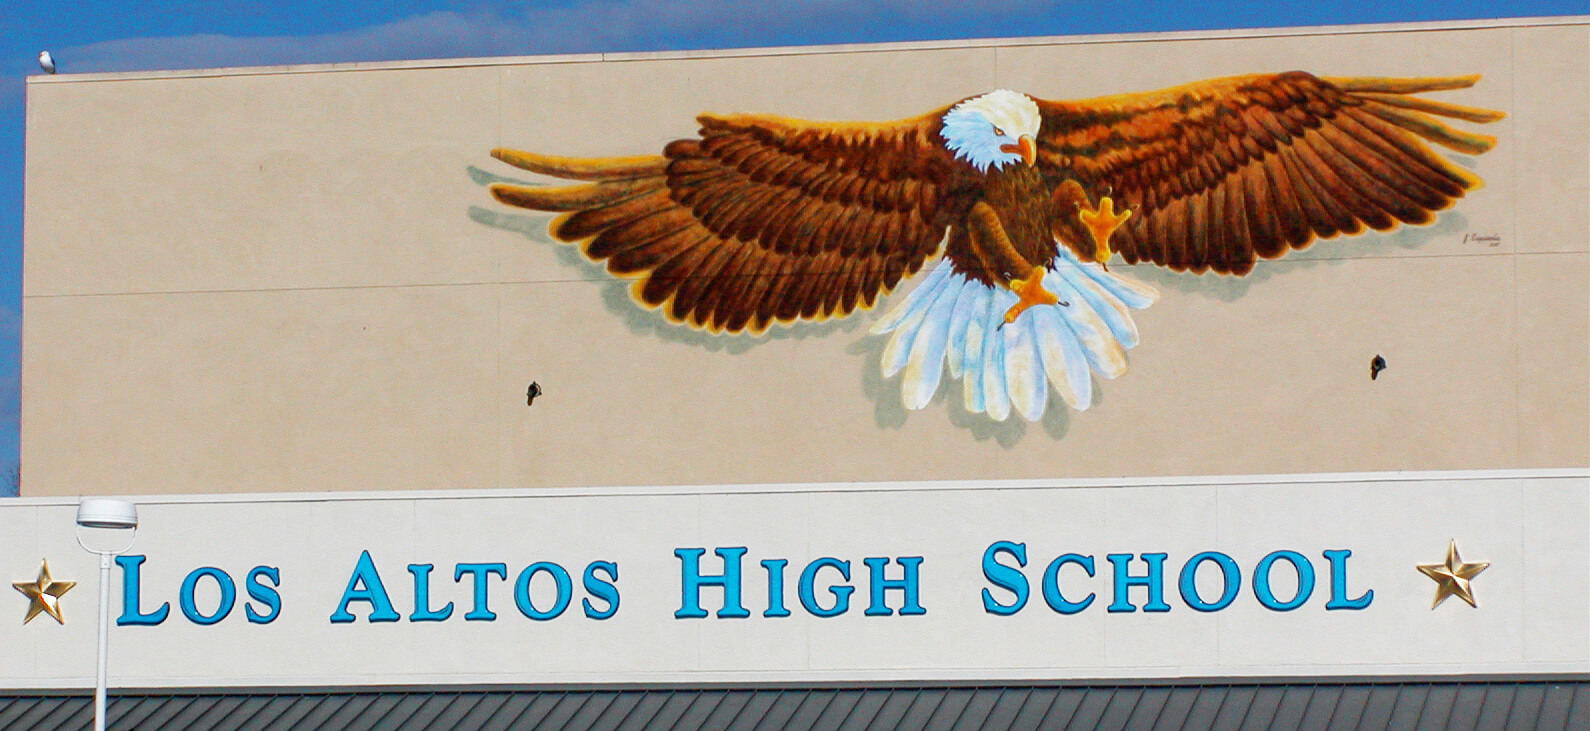 custom school signs Los Altos high gym exterior wall large eagle mascot mural painting